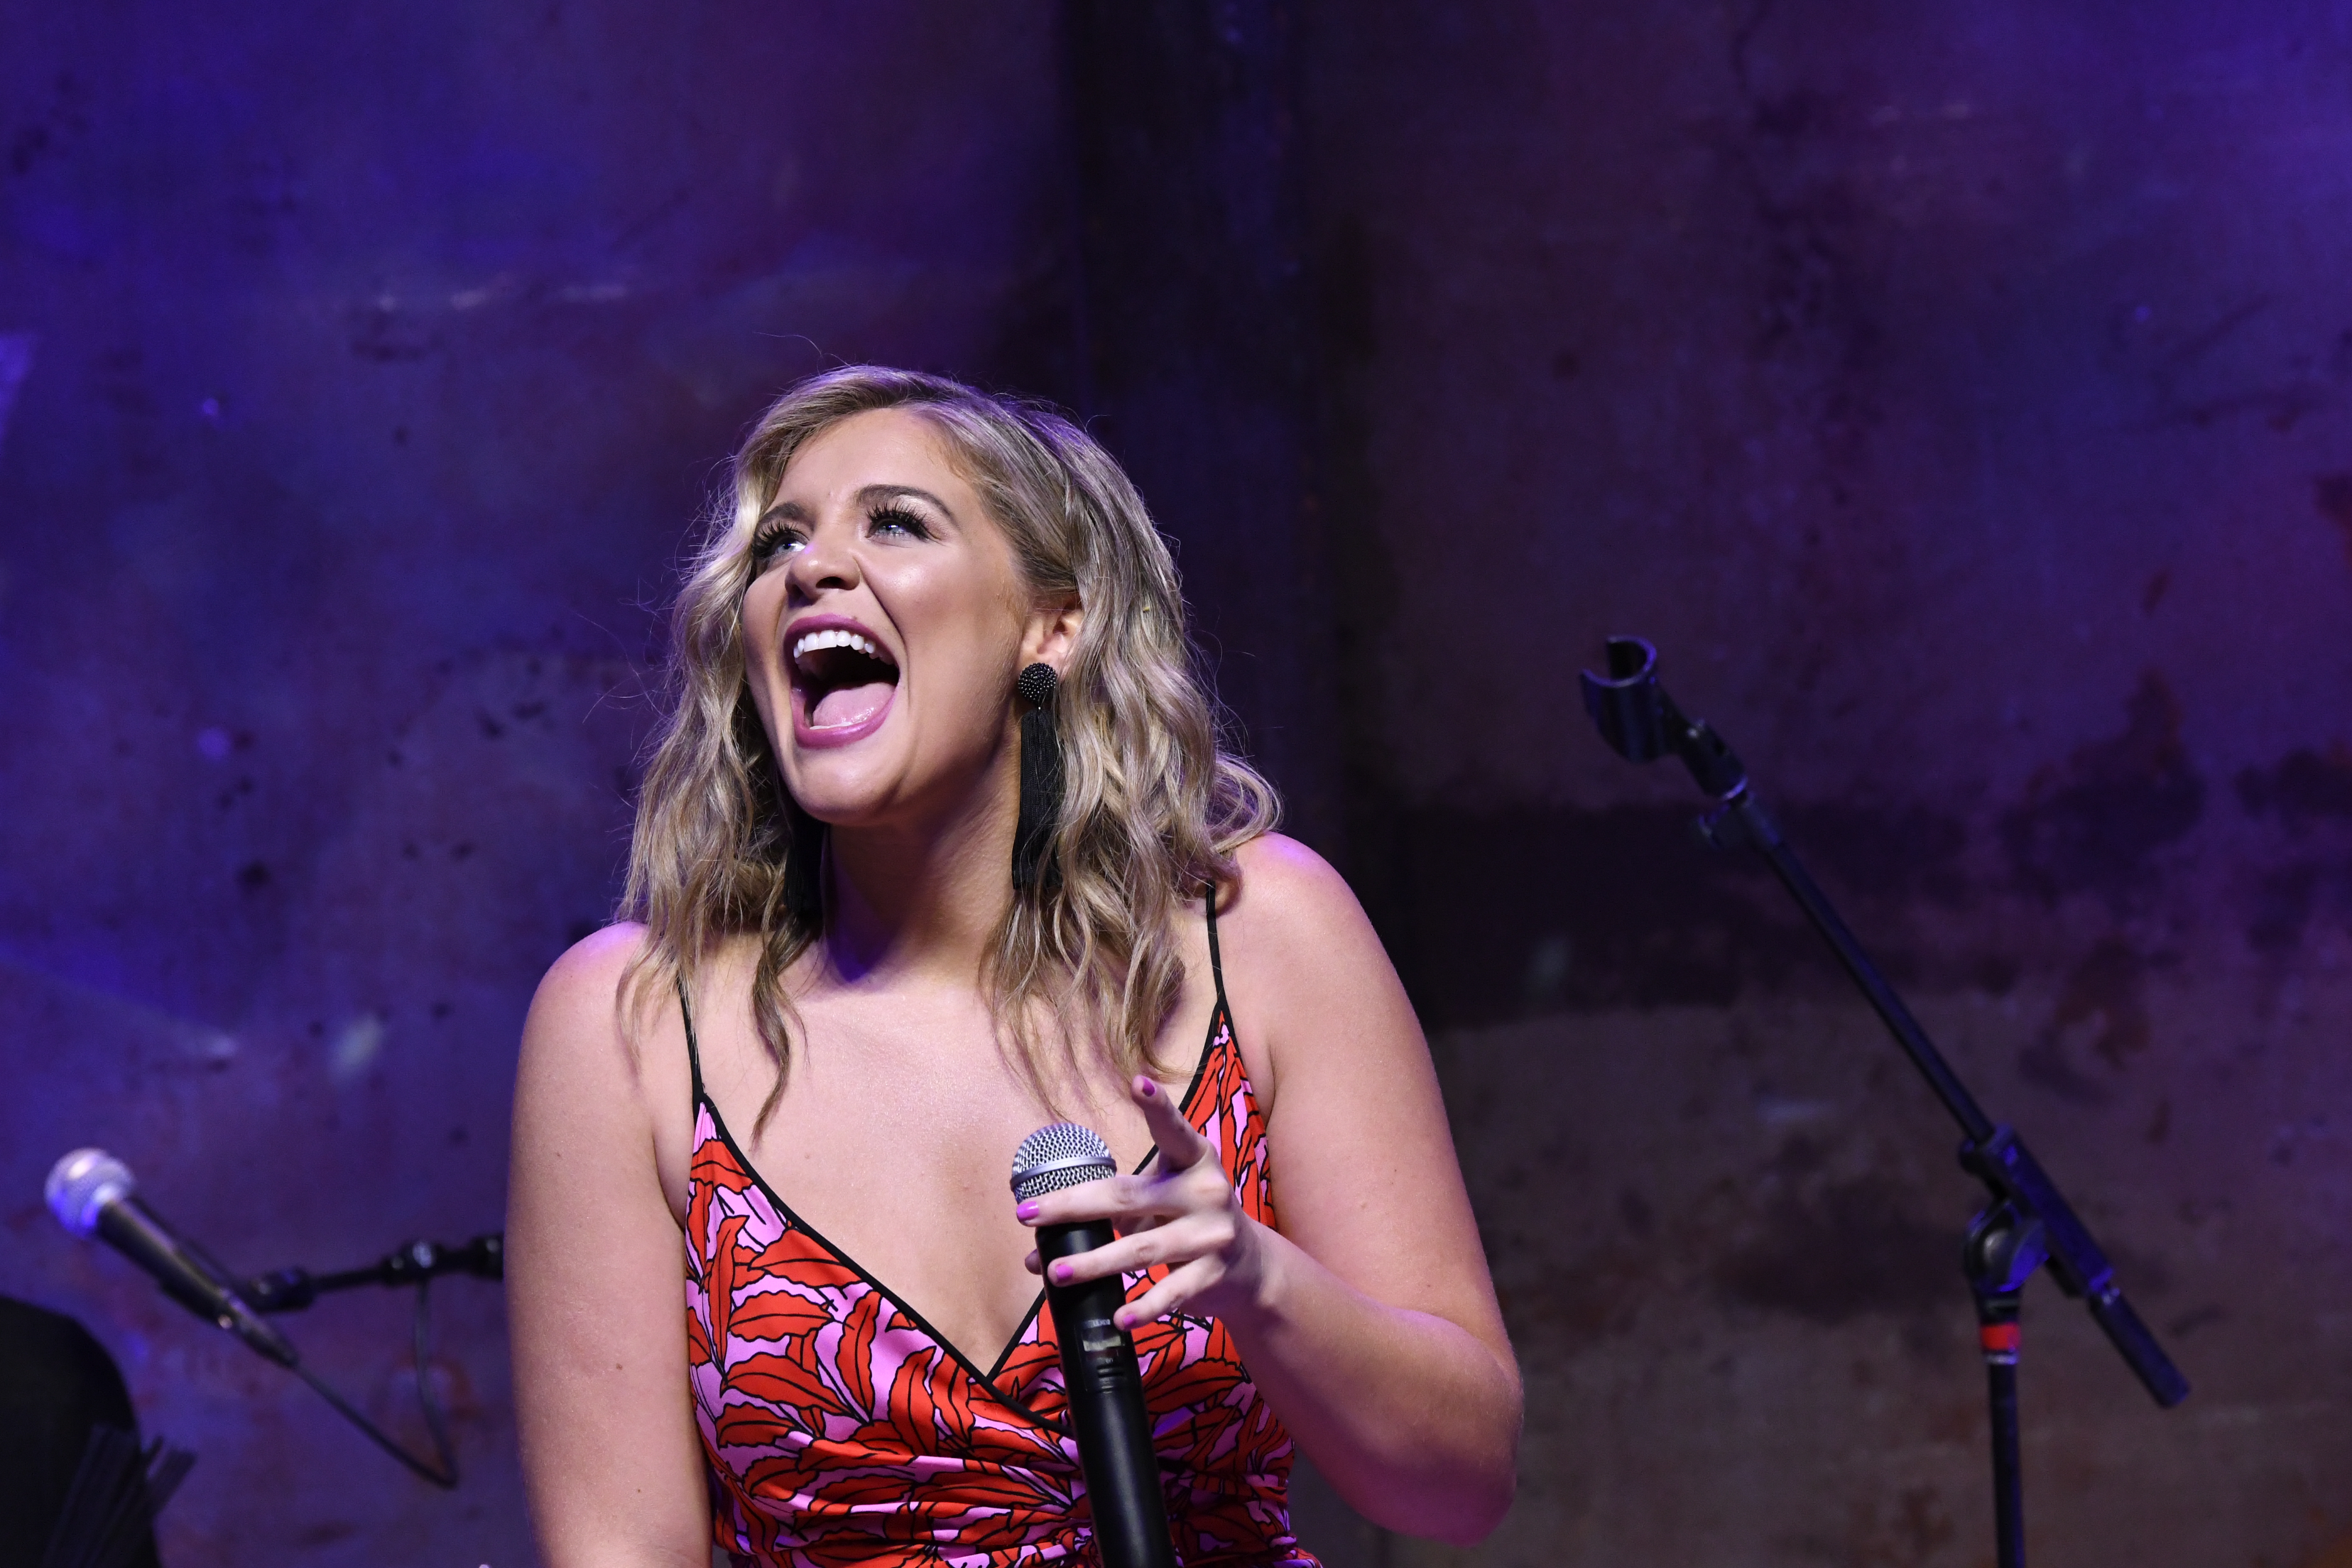 Lauren Alaina on Upcoming Headlining Tour: “It’s the Most Exciting Thing That’s Happened to Me”